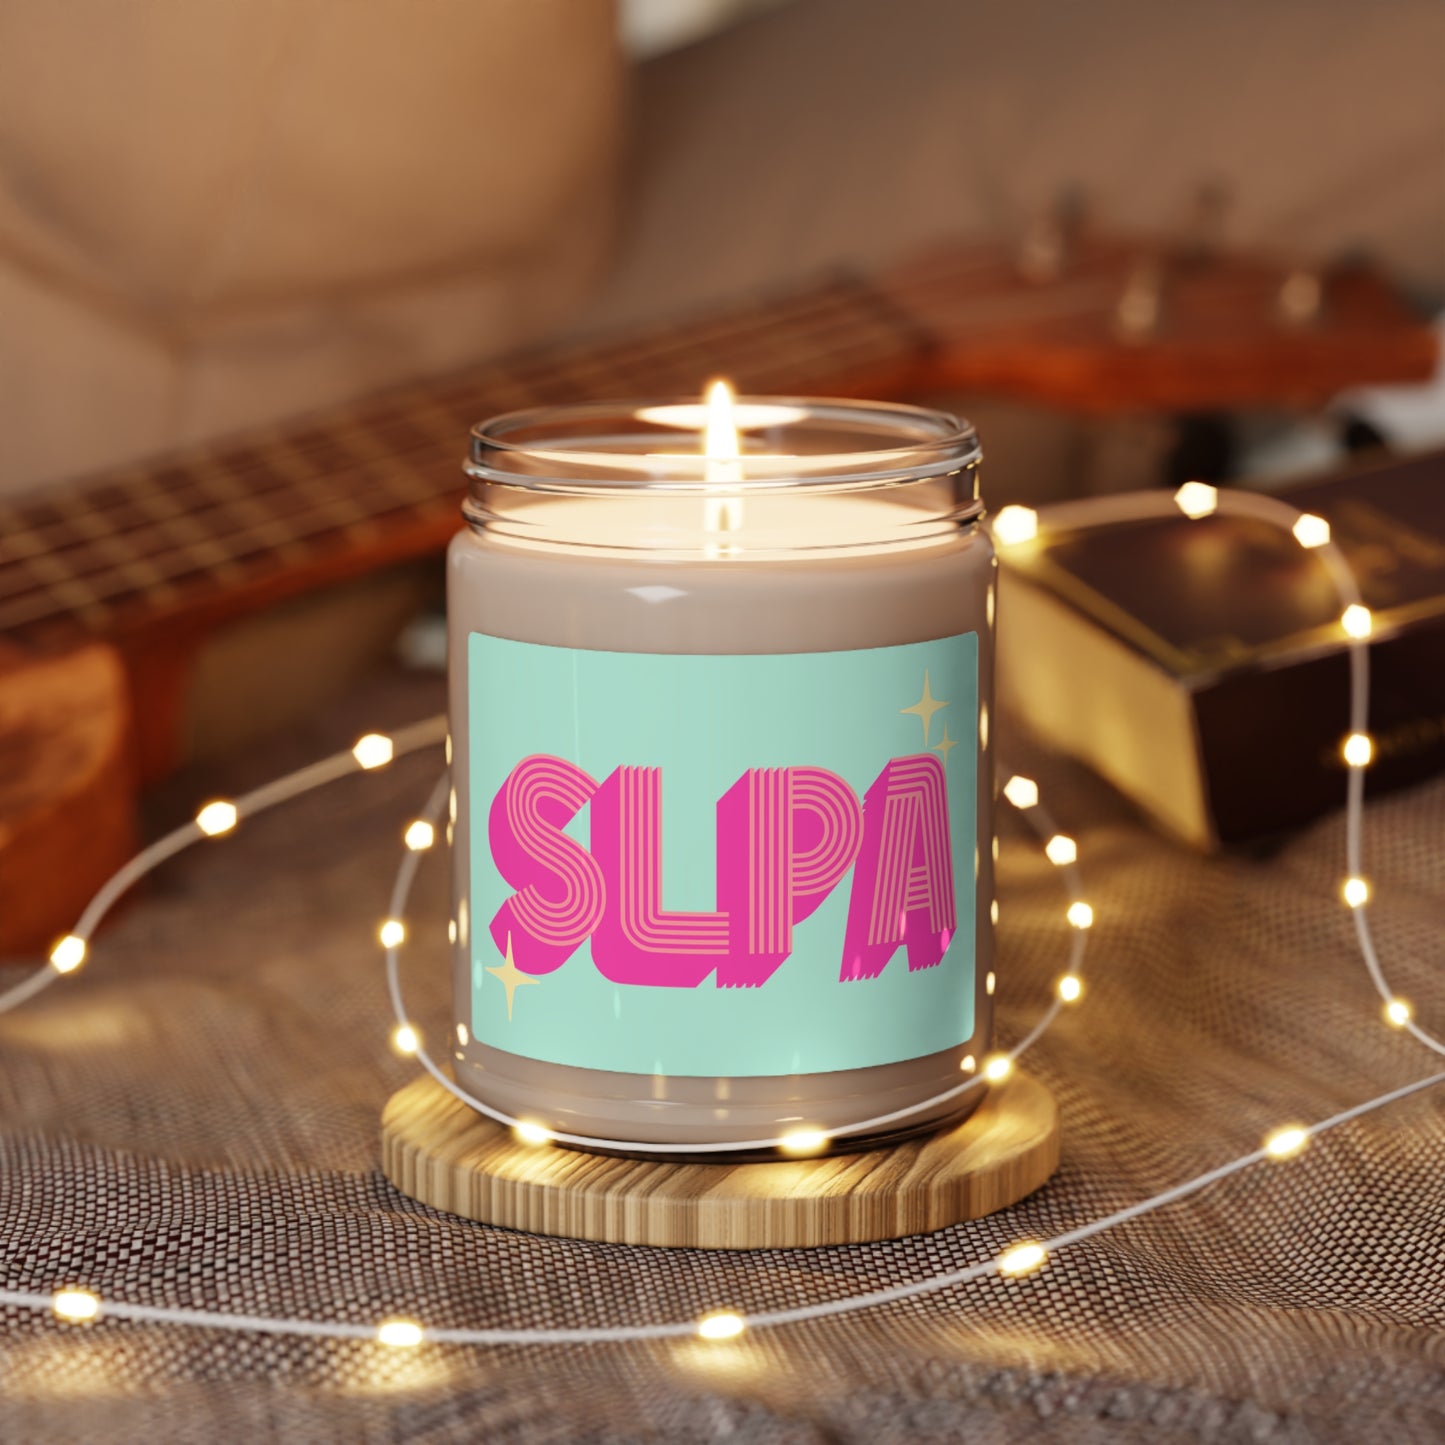 SLPA Retro Scented Soy Candle Gift, 9 oz